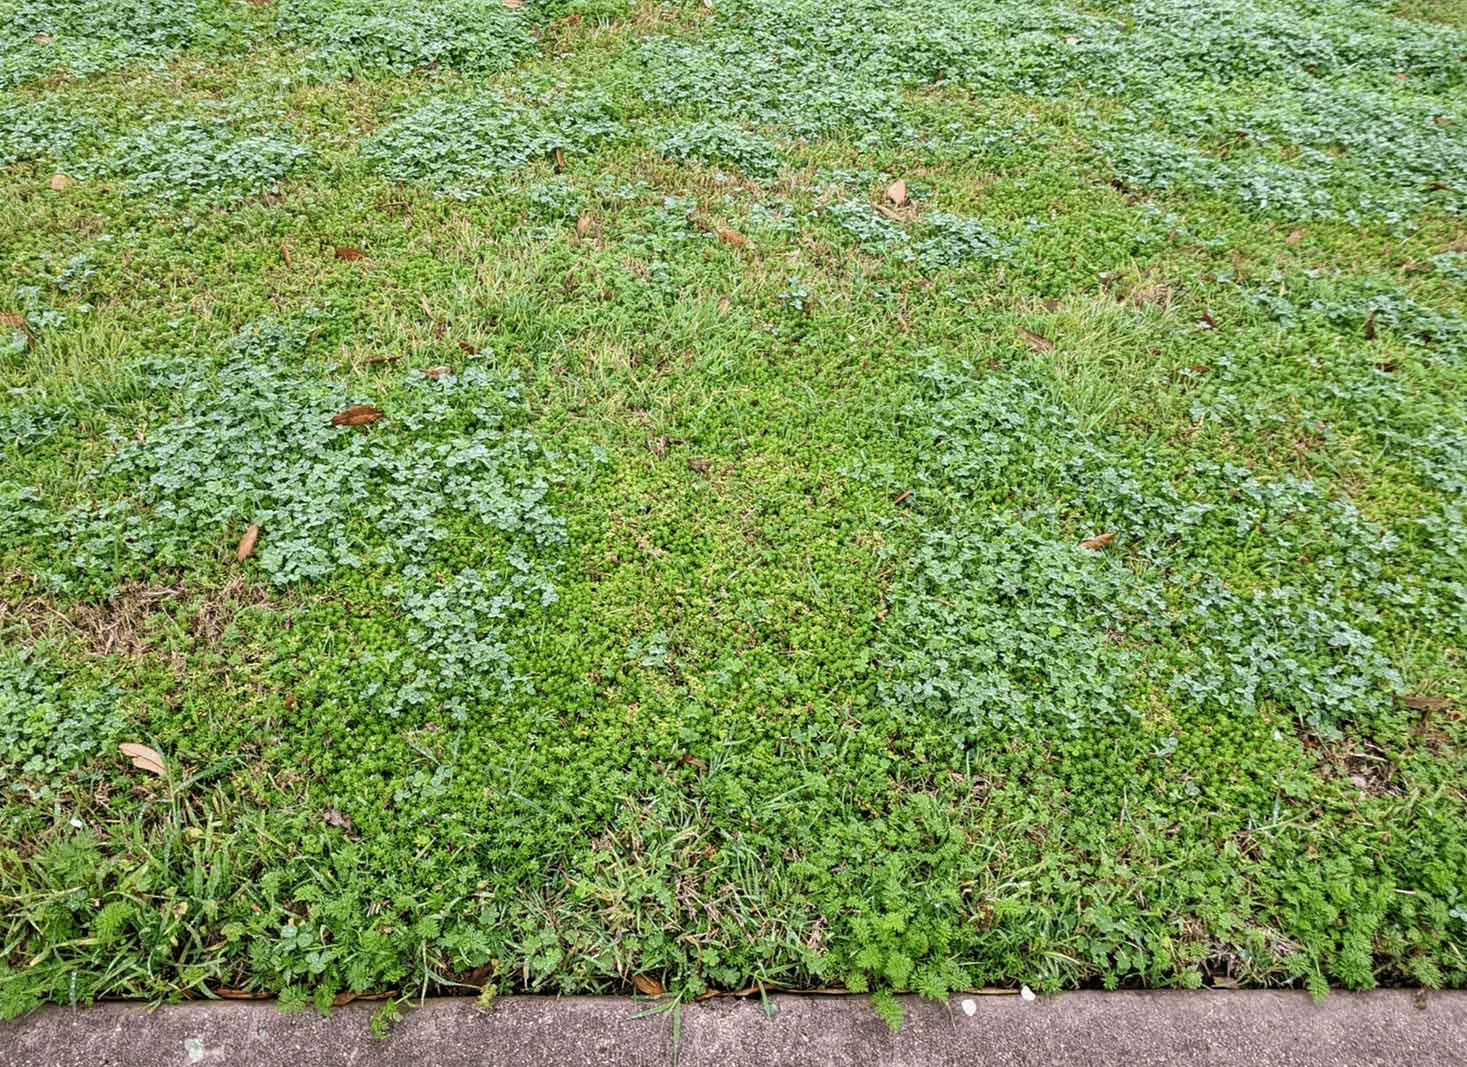 What will kill crabgrass but not St. Augustine